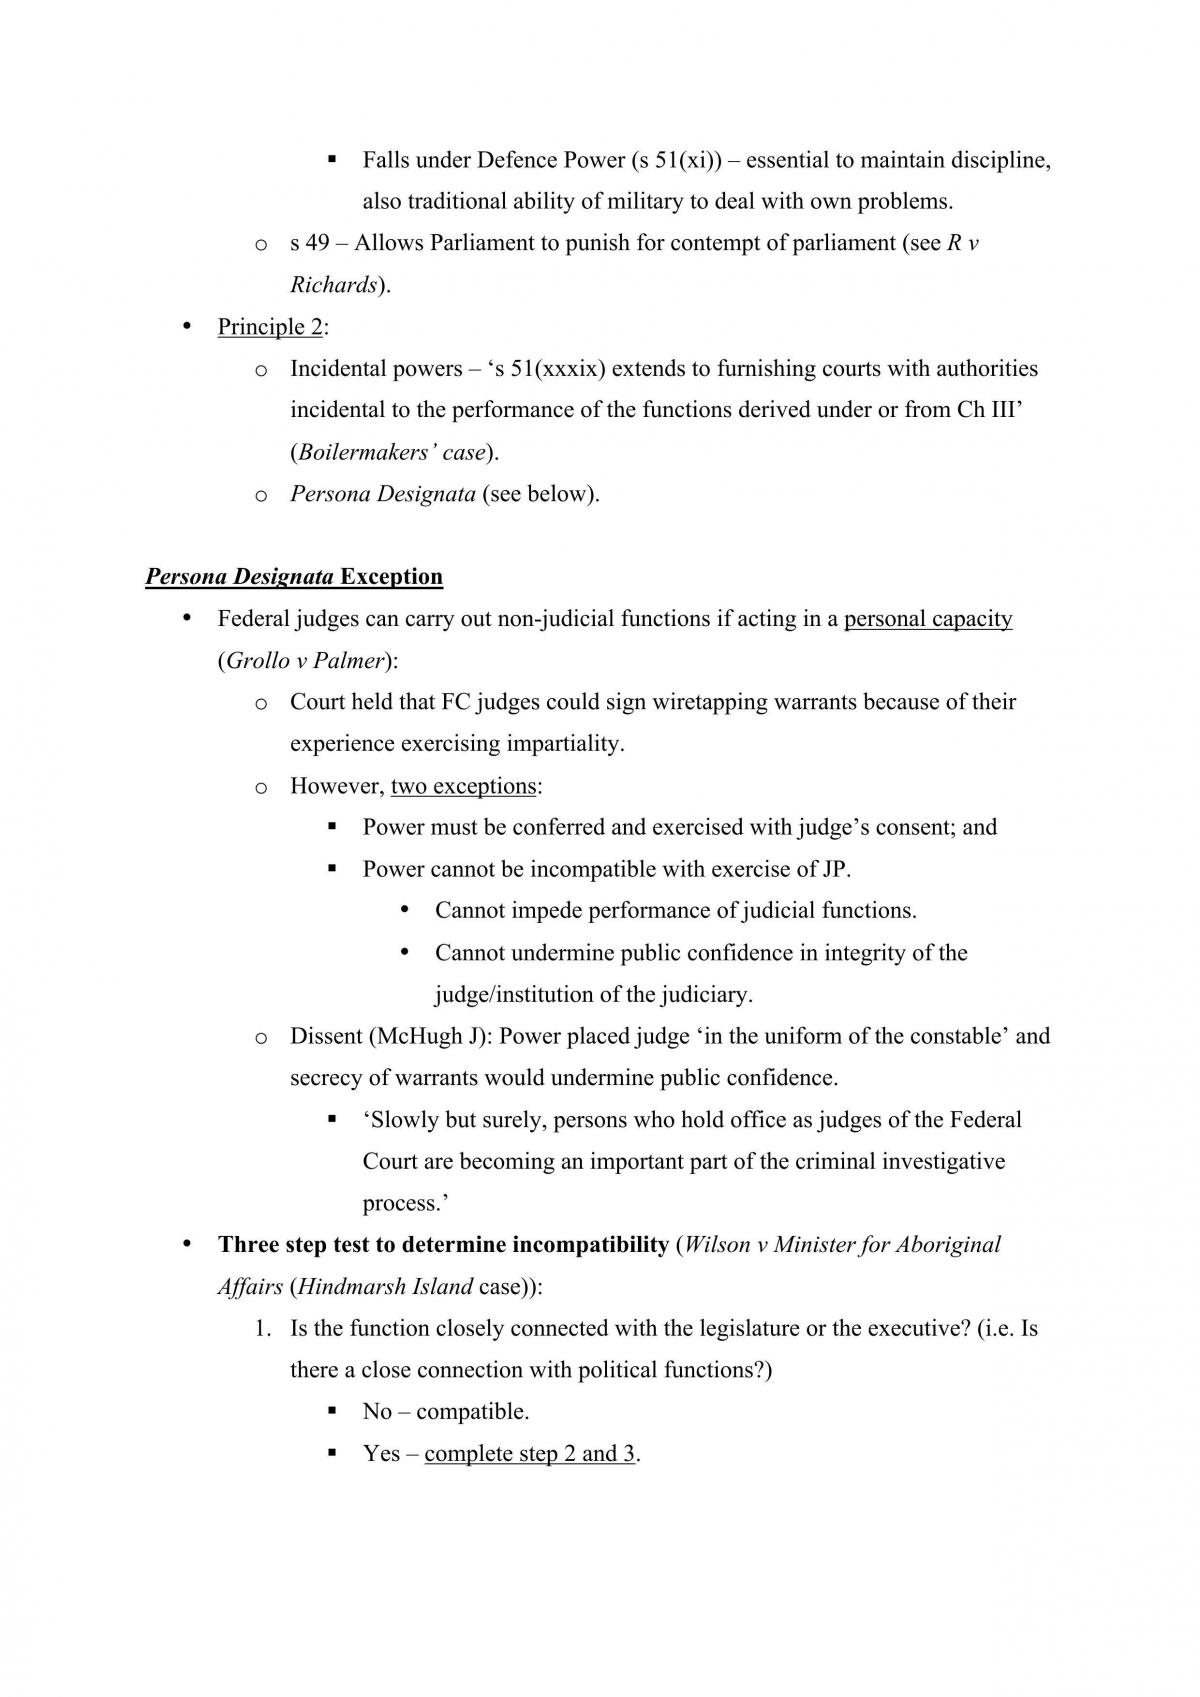 Constitutional Law Summary Full Exam Notes - 200009 - Constitutional Law - UWS - Page 22